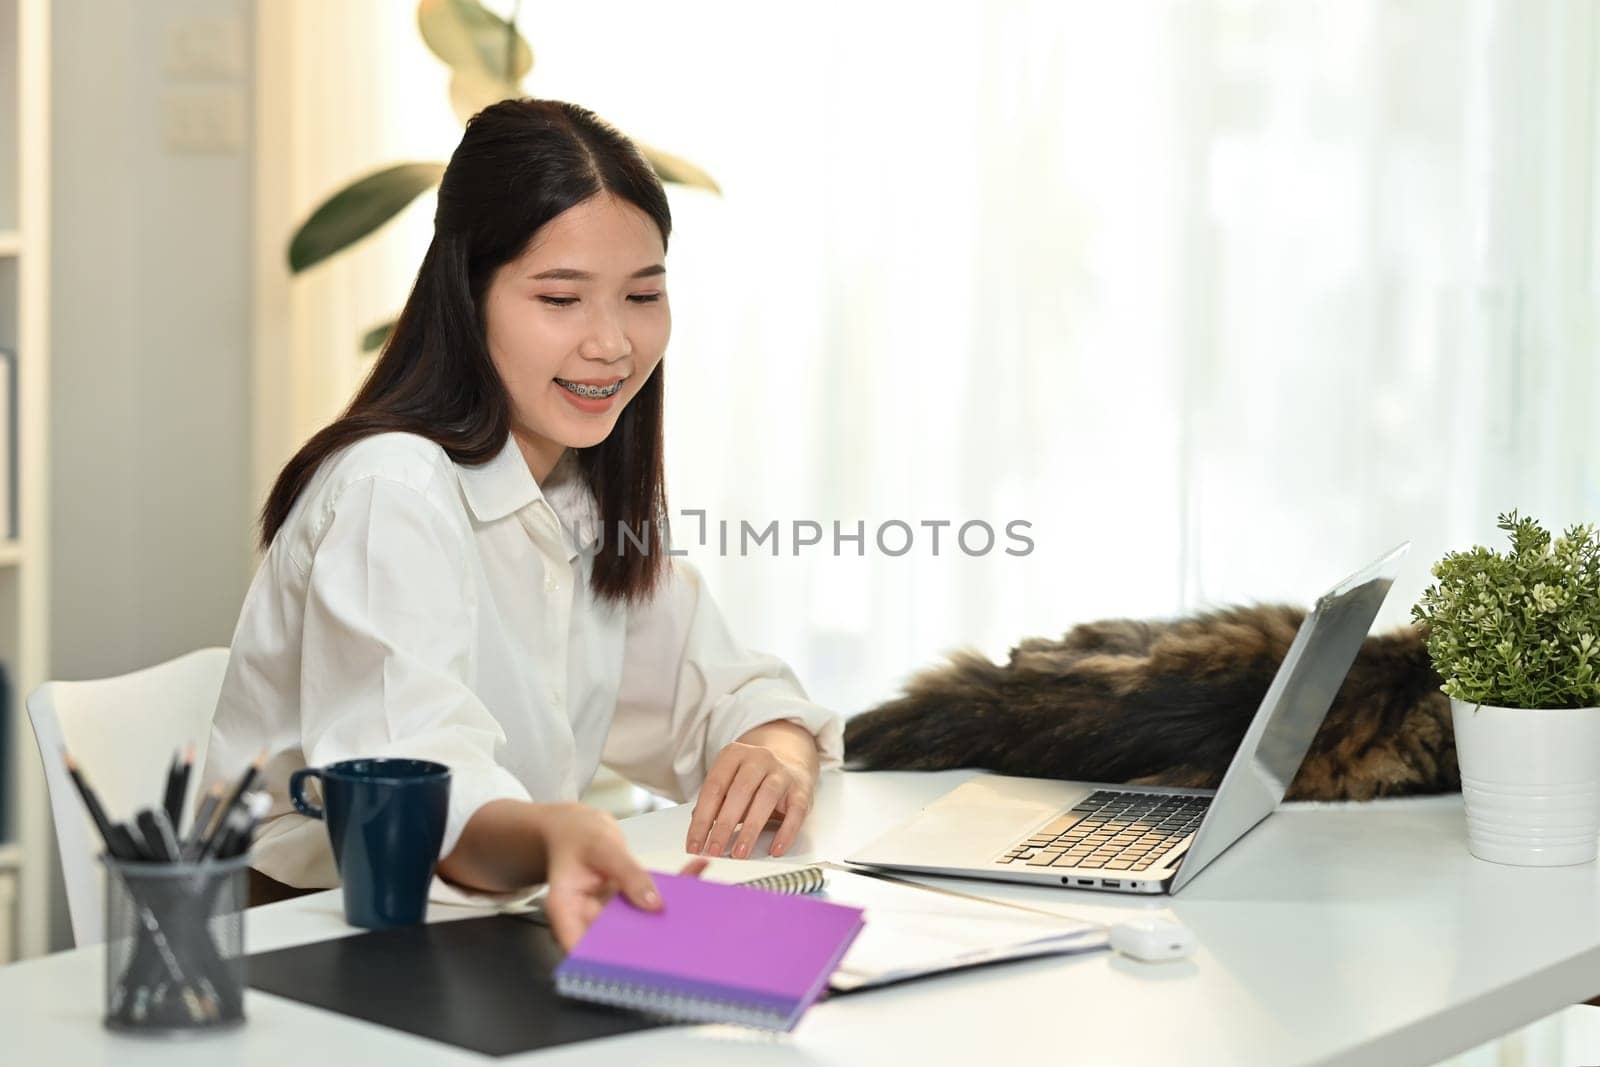 Young woman working at home office with domestic cat on table. High quality photo